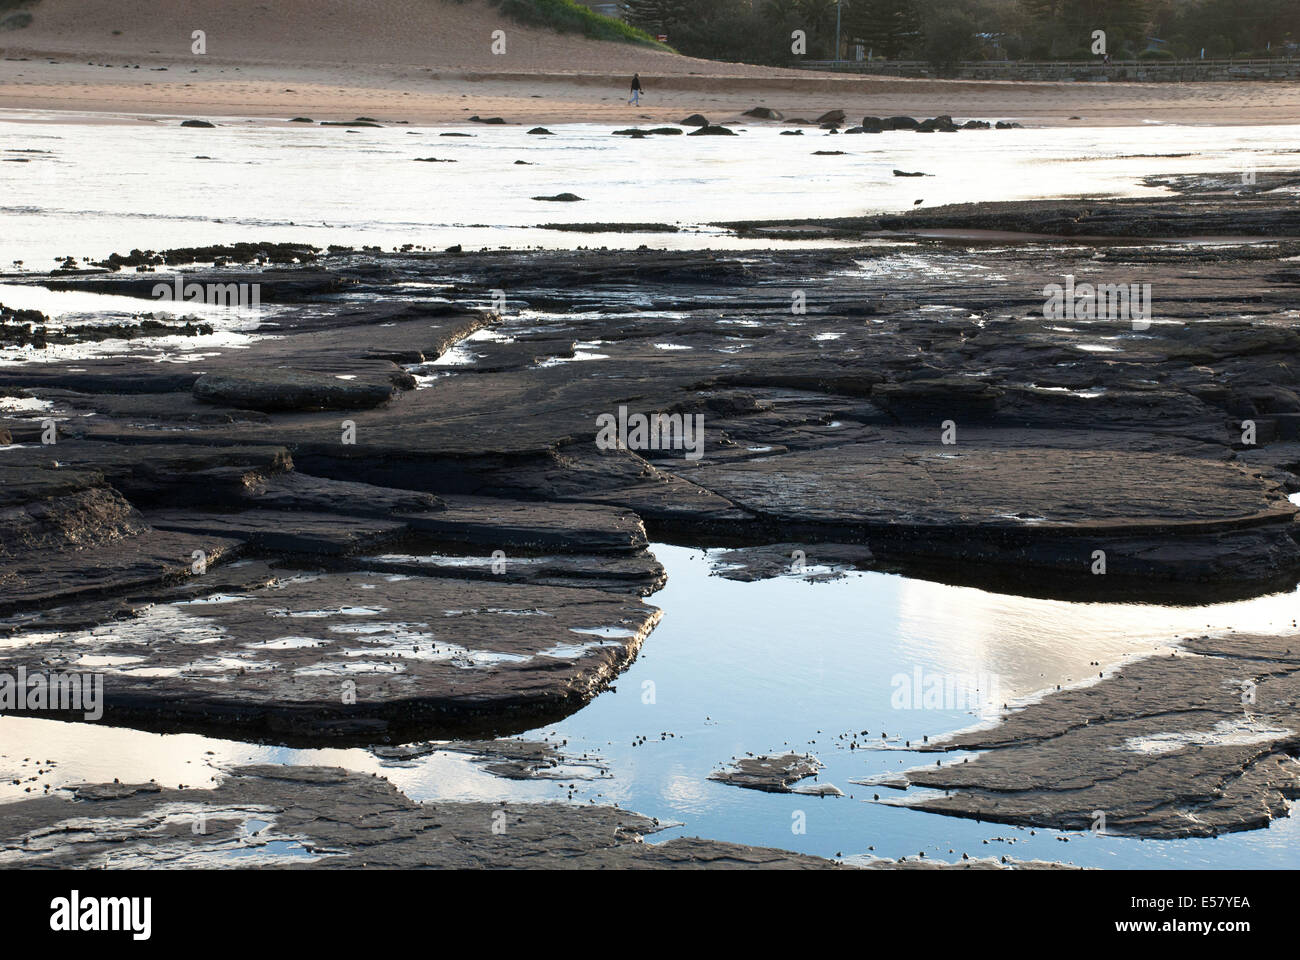 Low tide at North Narrabeen beach, with rocks exposed. Stock Photo